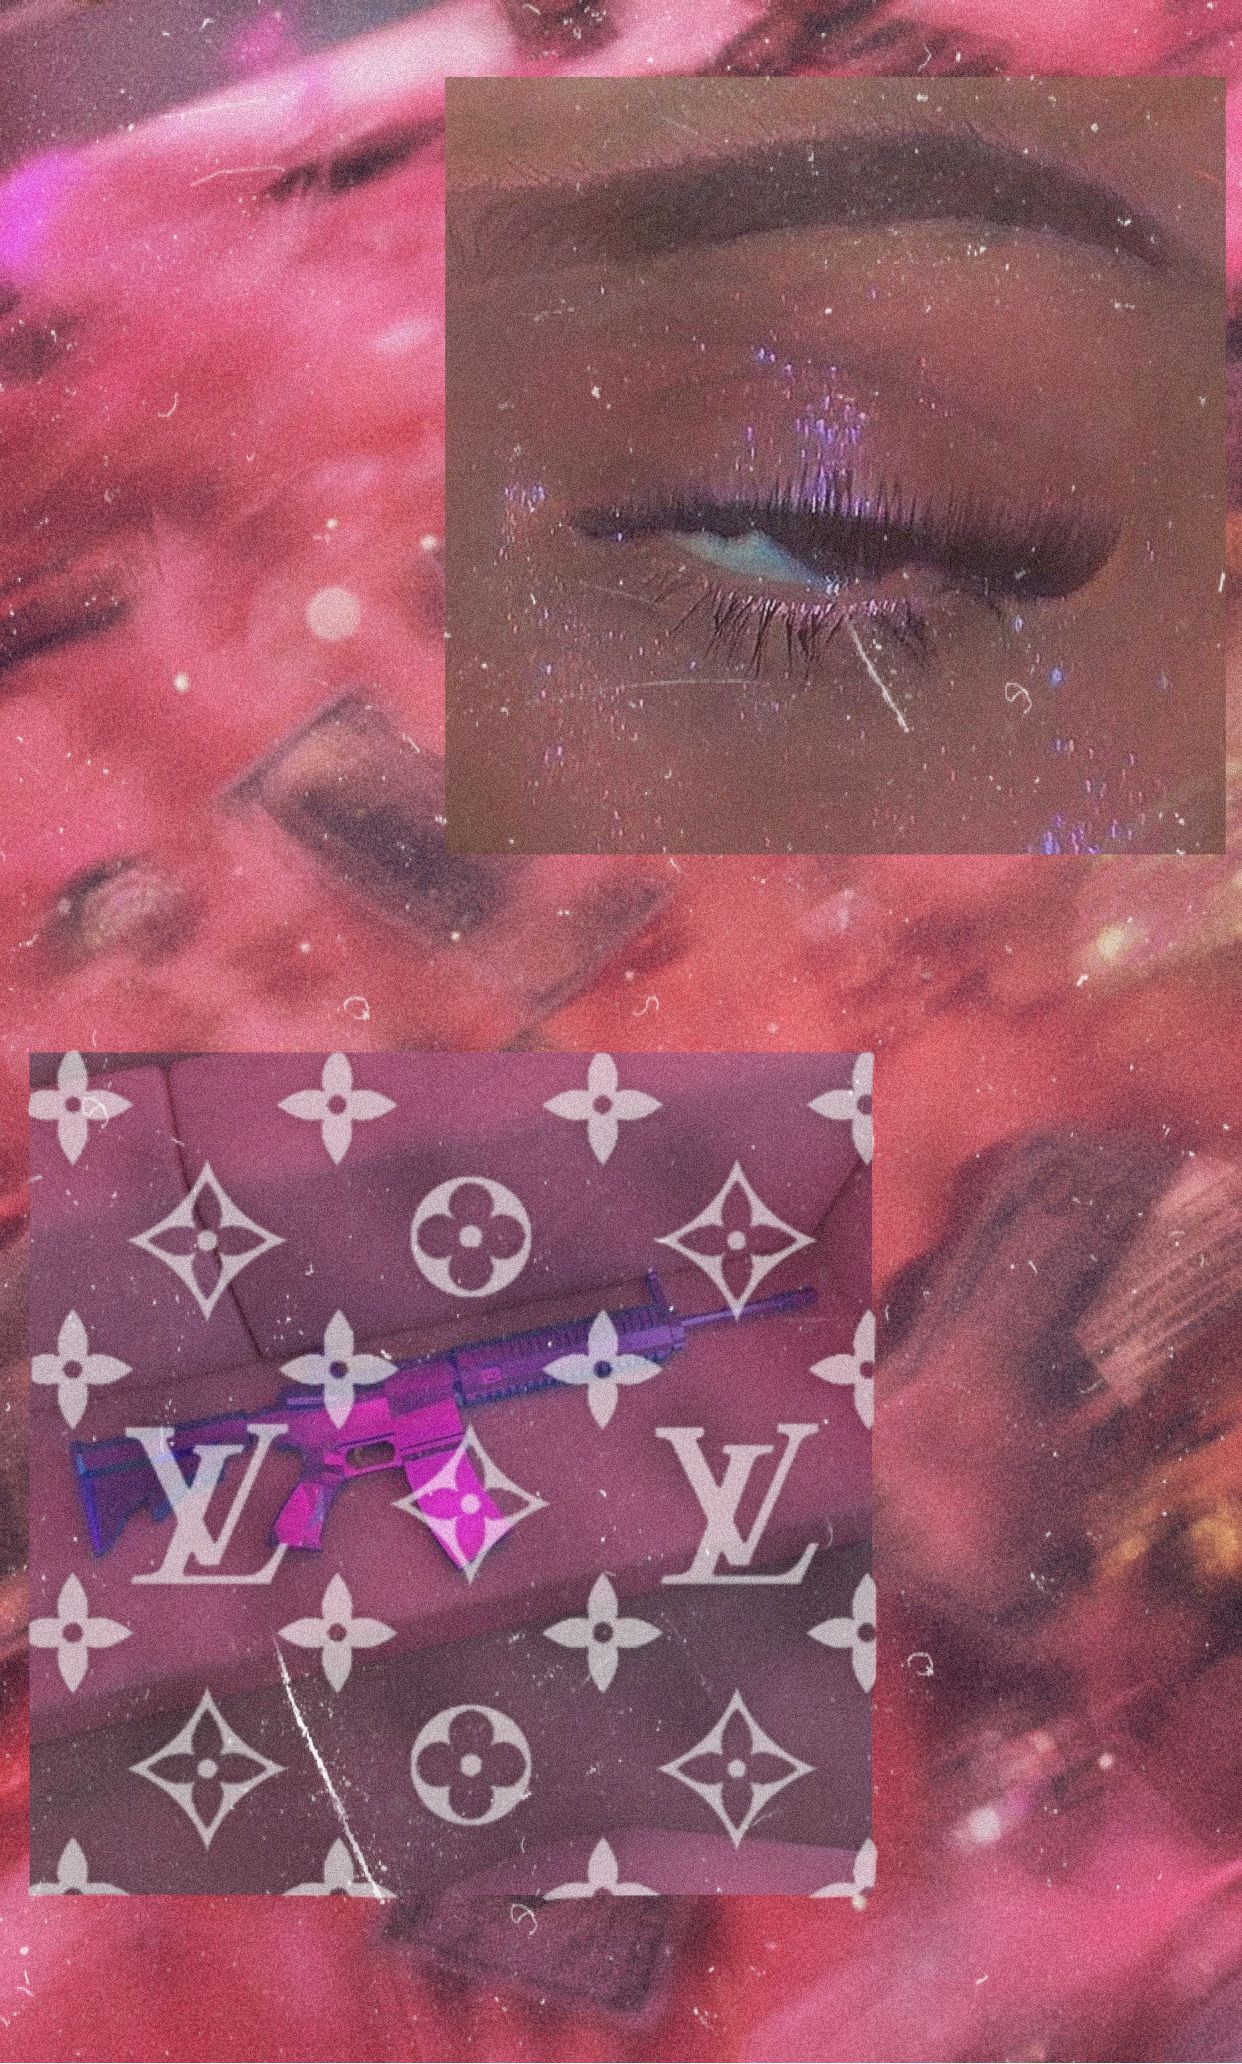 A collage of a woman's eyes, a Louis Vuitton logo, and a pink and purple gun. - Baddie